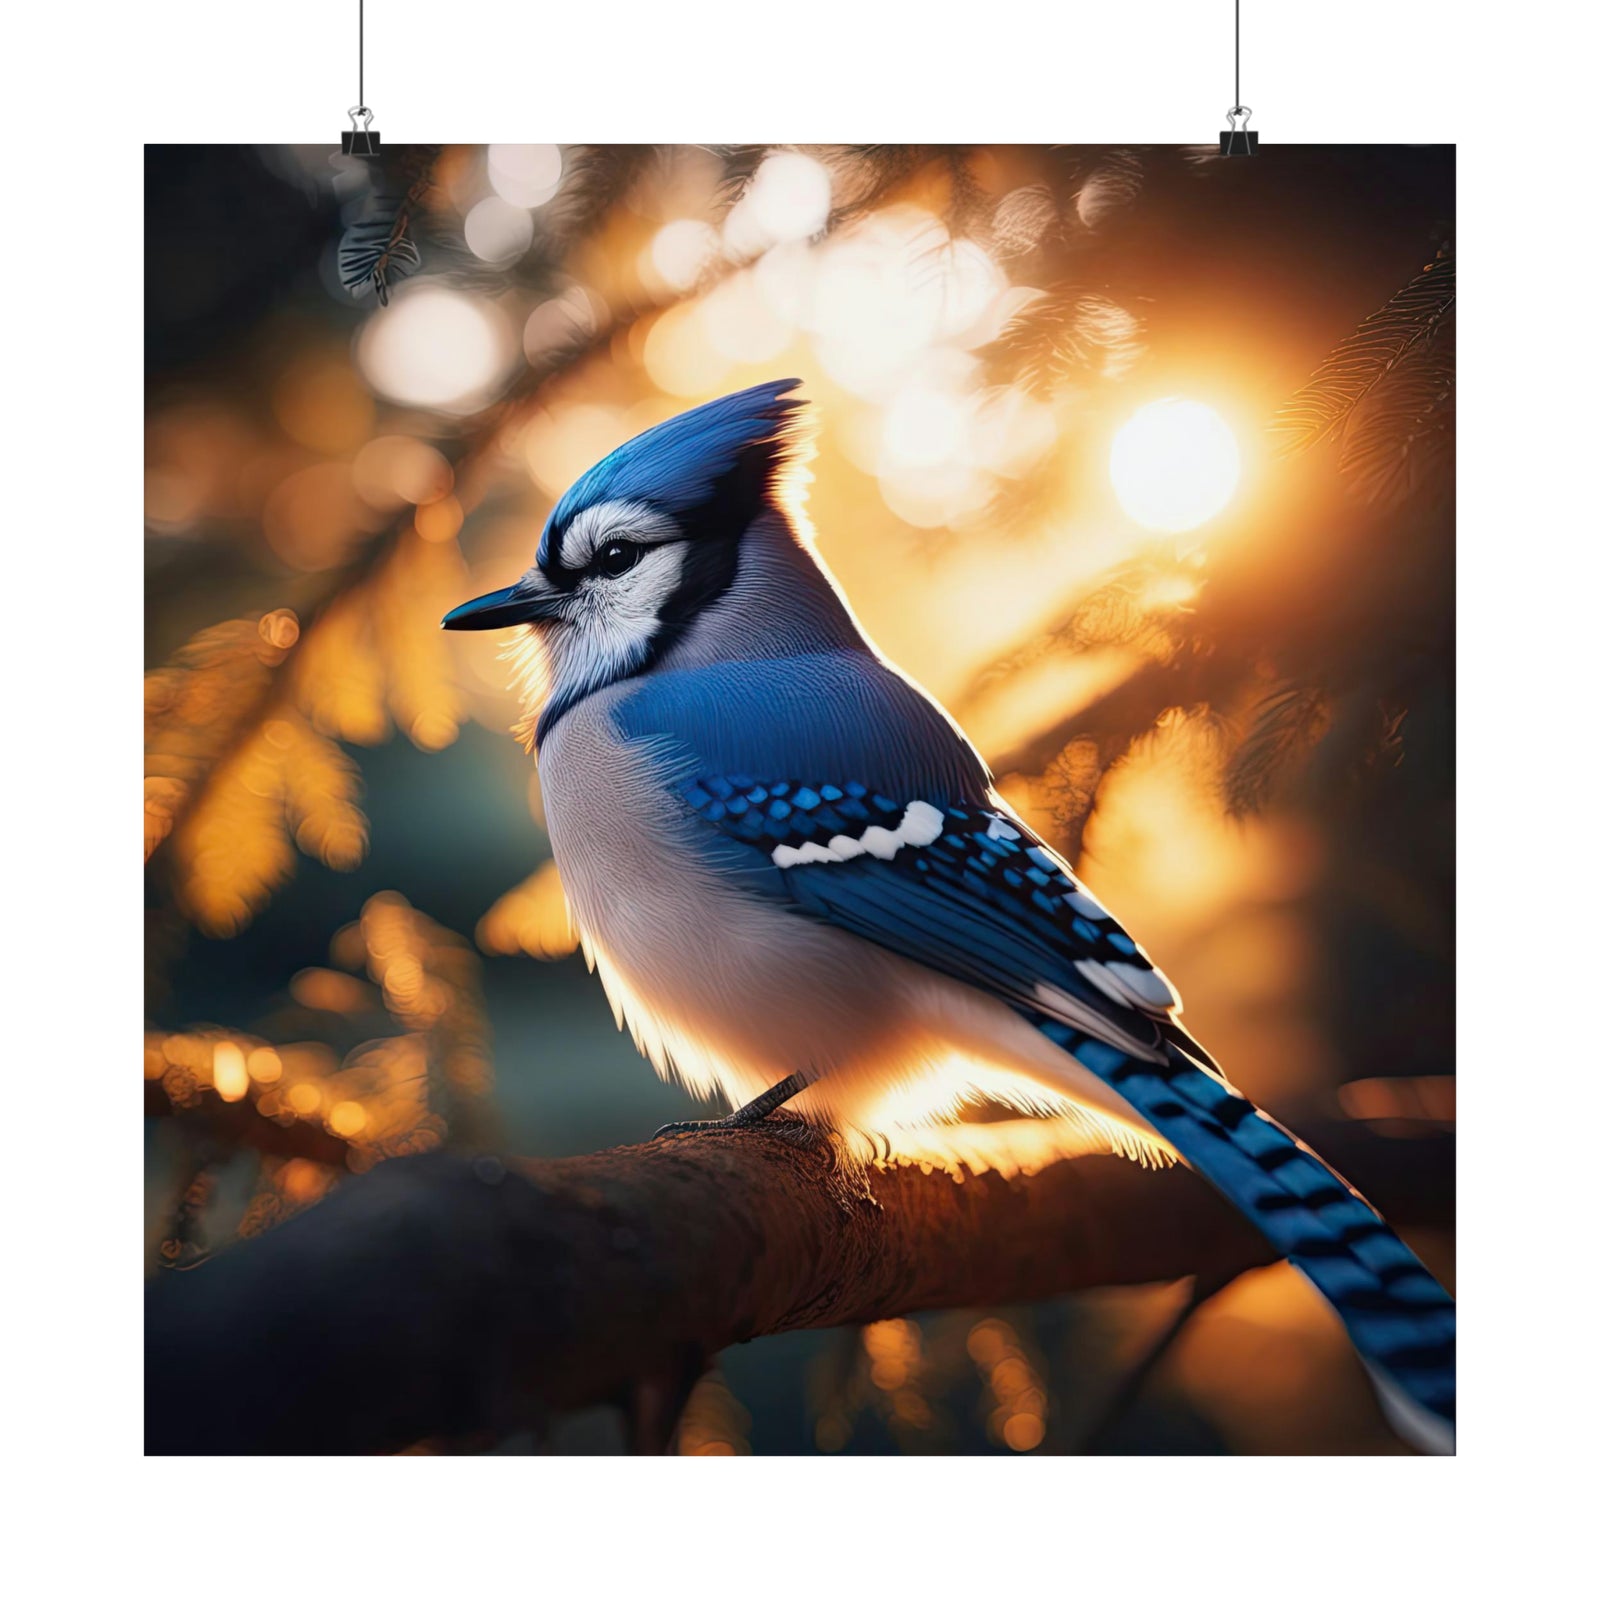 Blue Jay in Golden Sunset Glow Poster